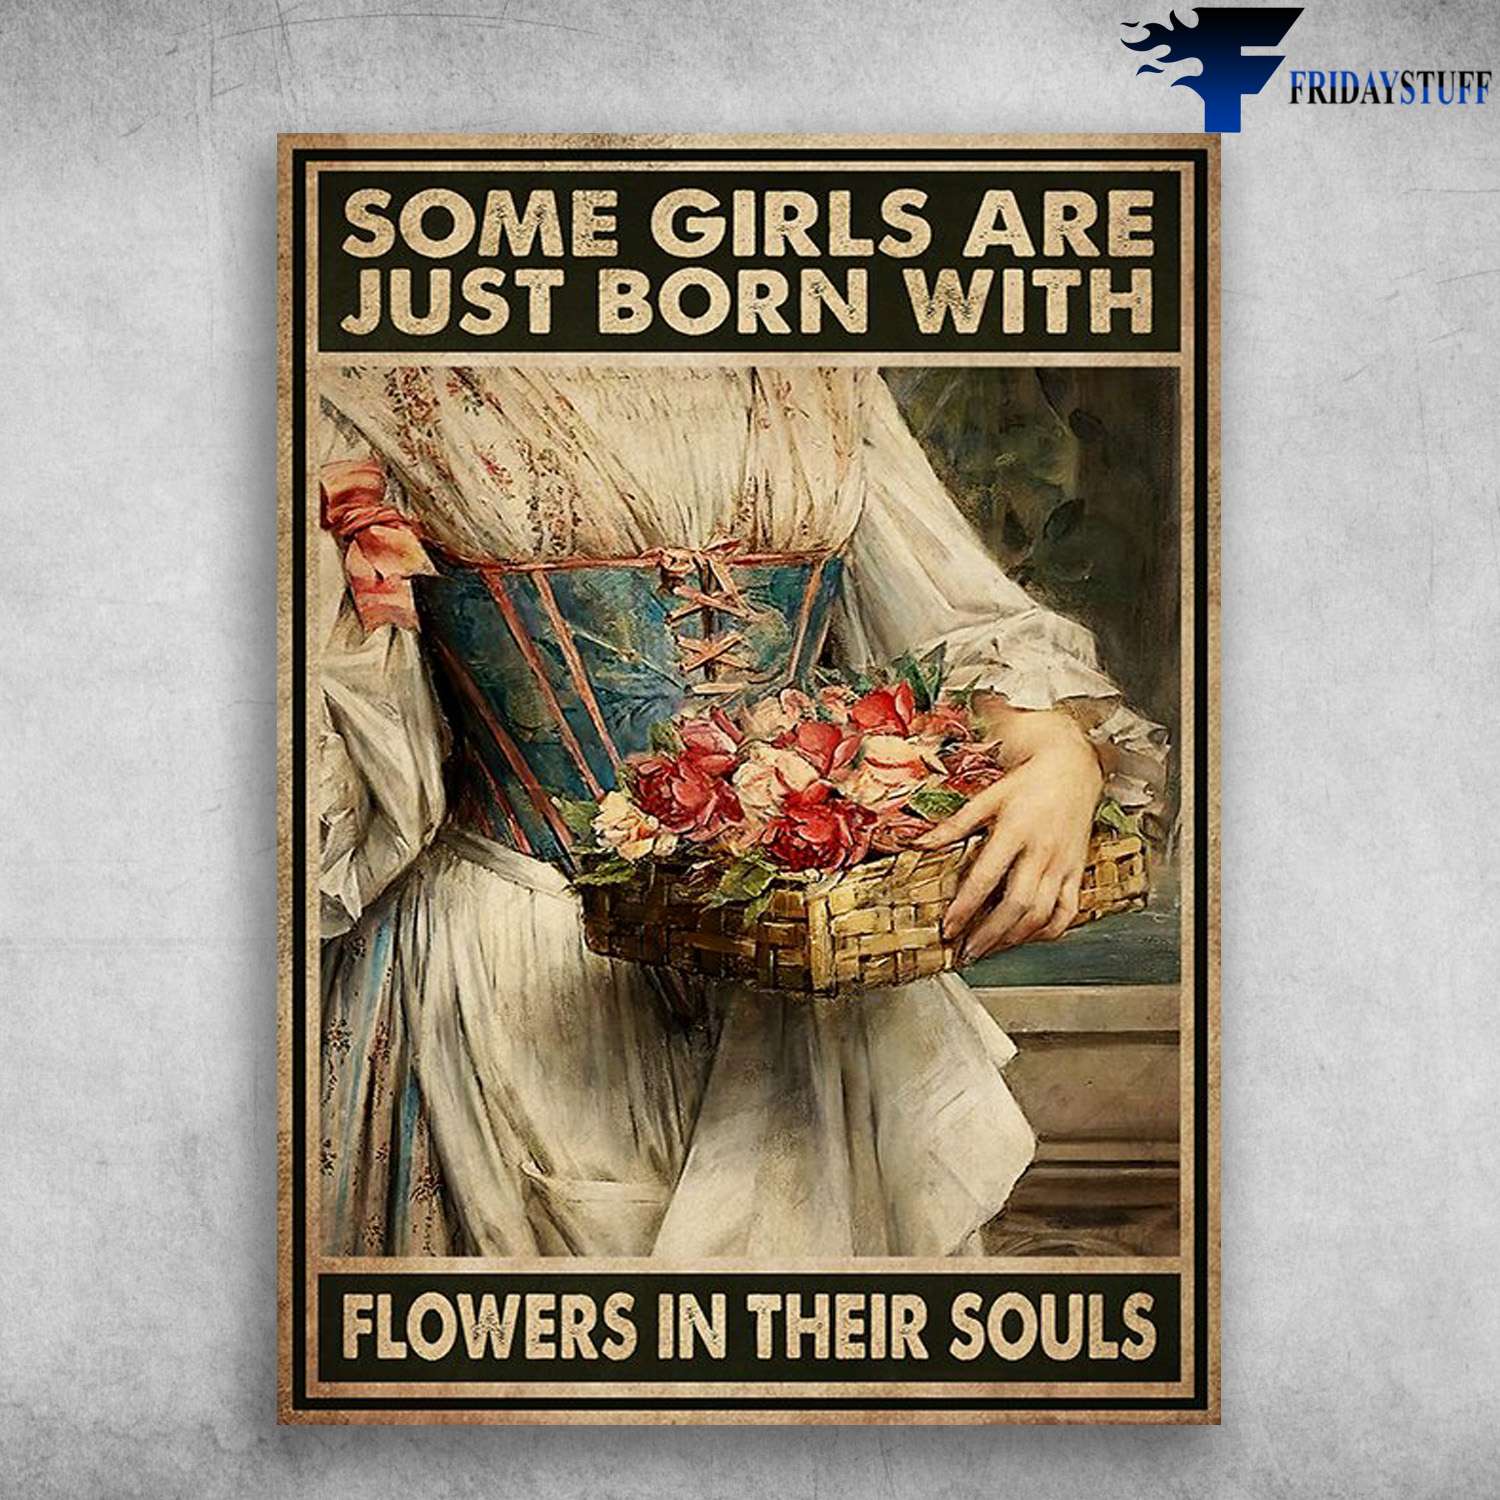 Girl Loves Flower - Some Girls Are Just Born With, Flowers In Their Souls